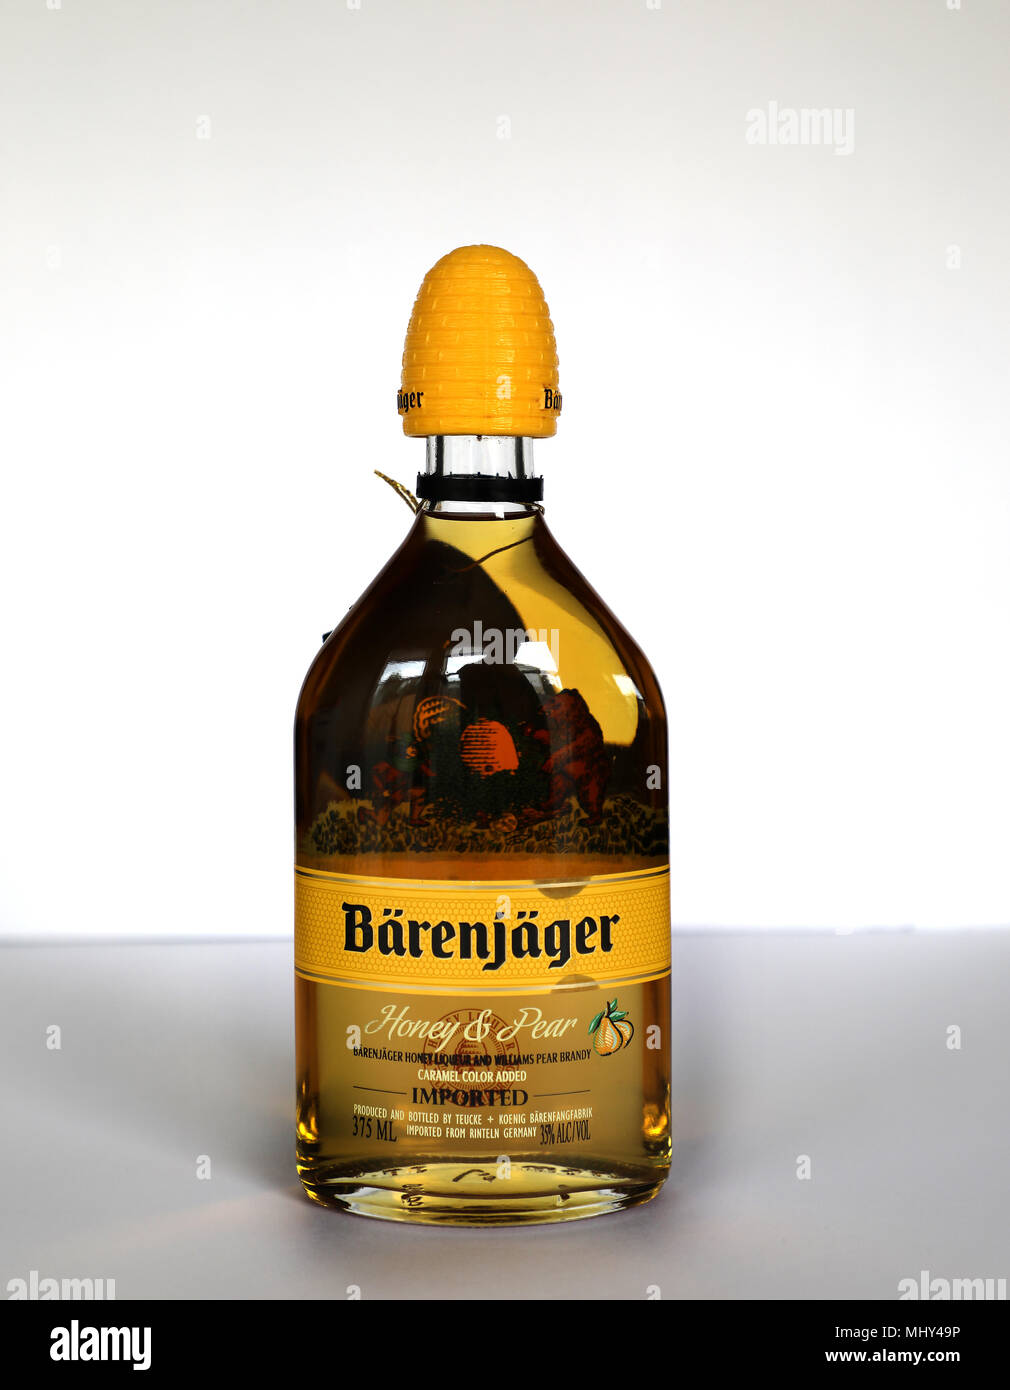 Barenjager Honey and Pear Brandy Liqueur Product of Germany Alcohol Bottle on White Background Stock Photo